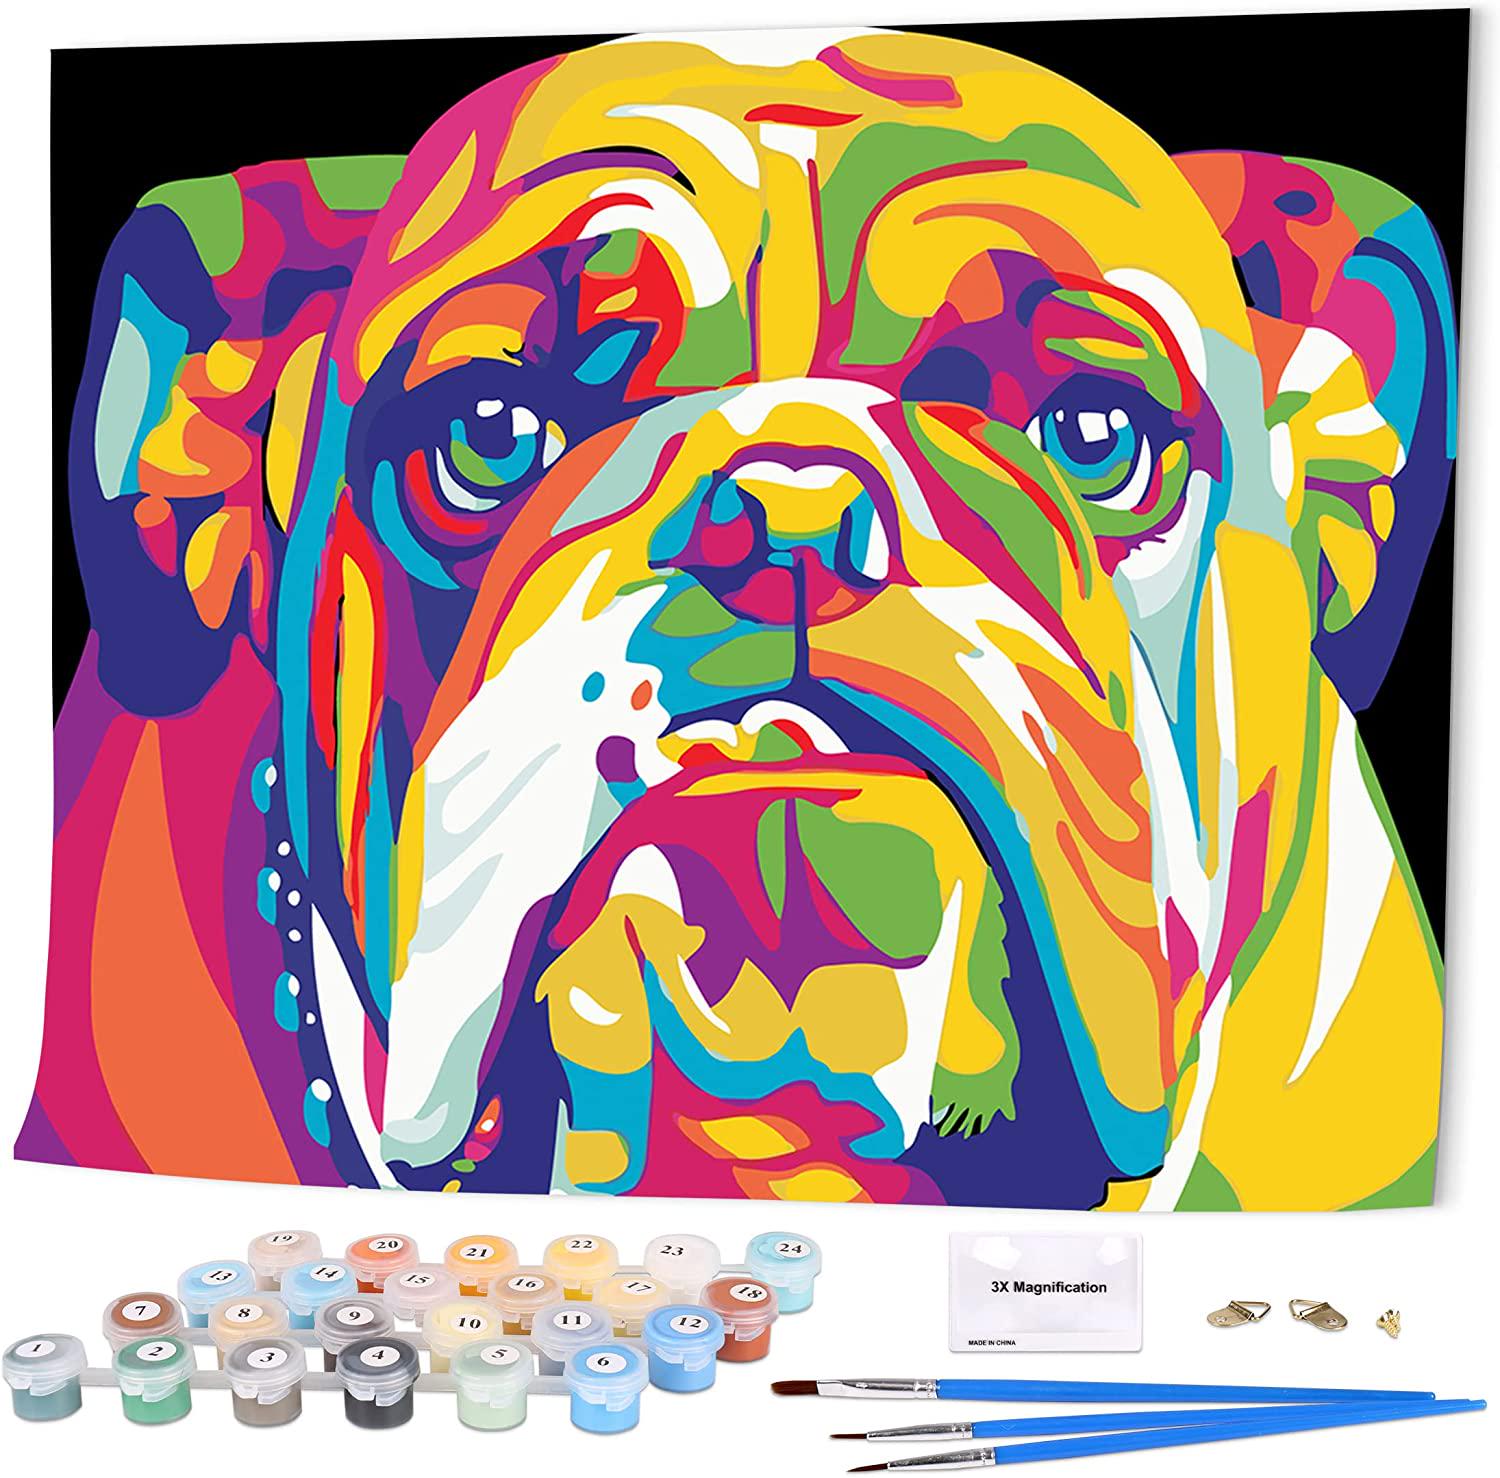 LIUDAO, LIUDAO Paint by Number Painting Kit for Kids Adults with 3 Brushes Cat and Tiger 16x20 Inch Without Frame, Colorful Dog, Frameless